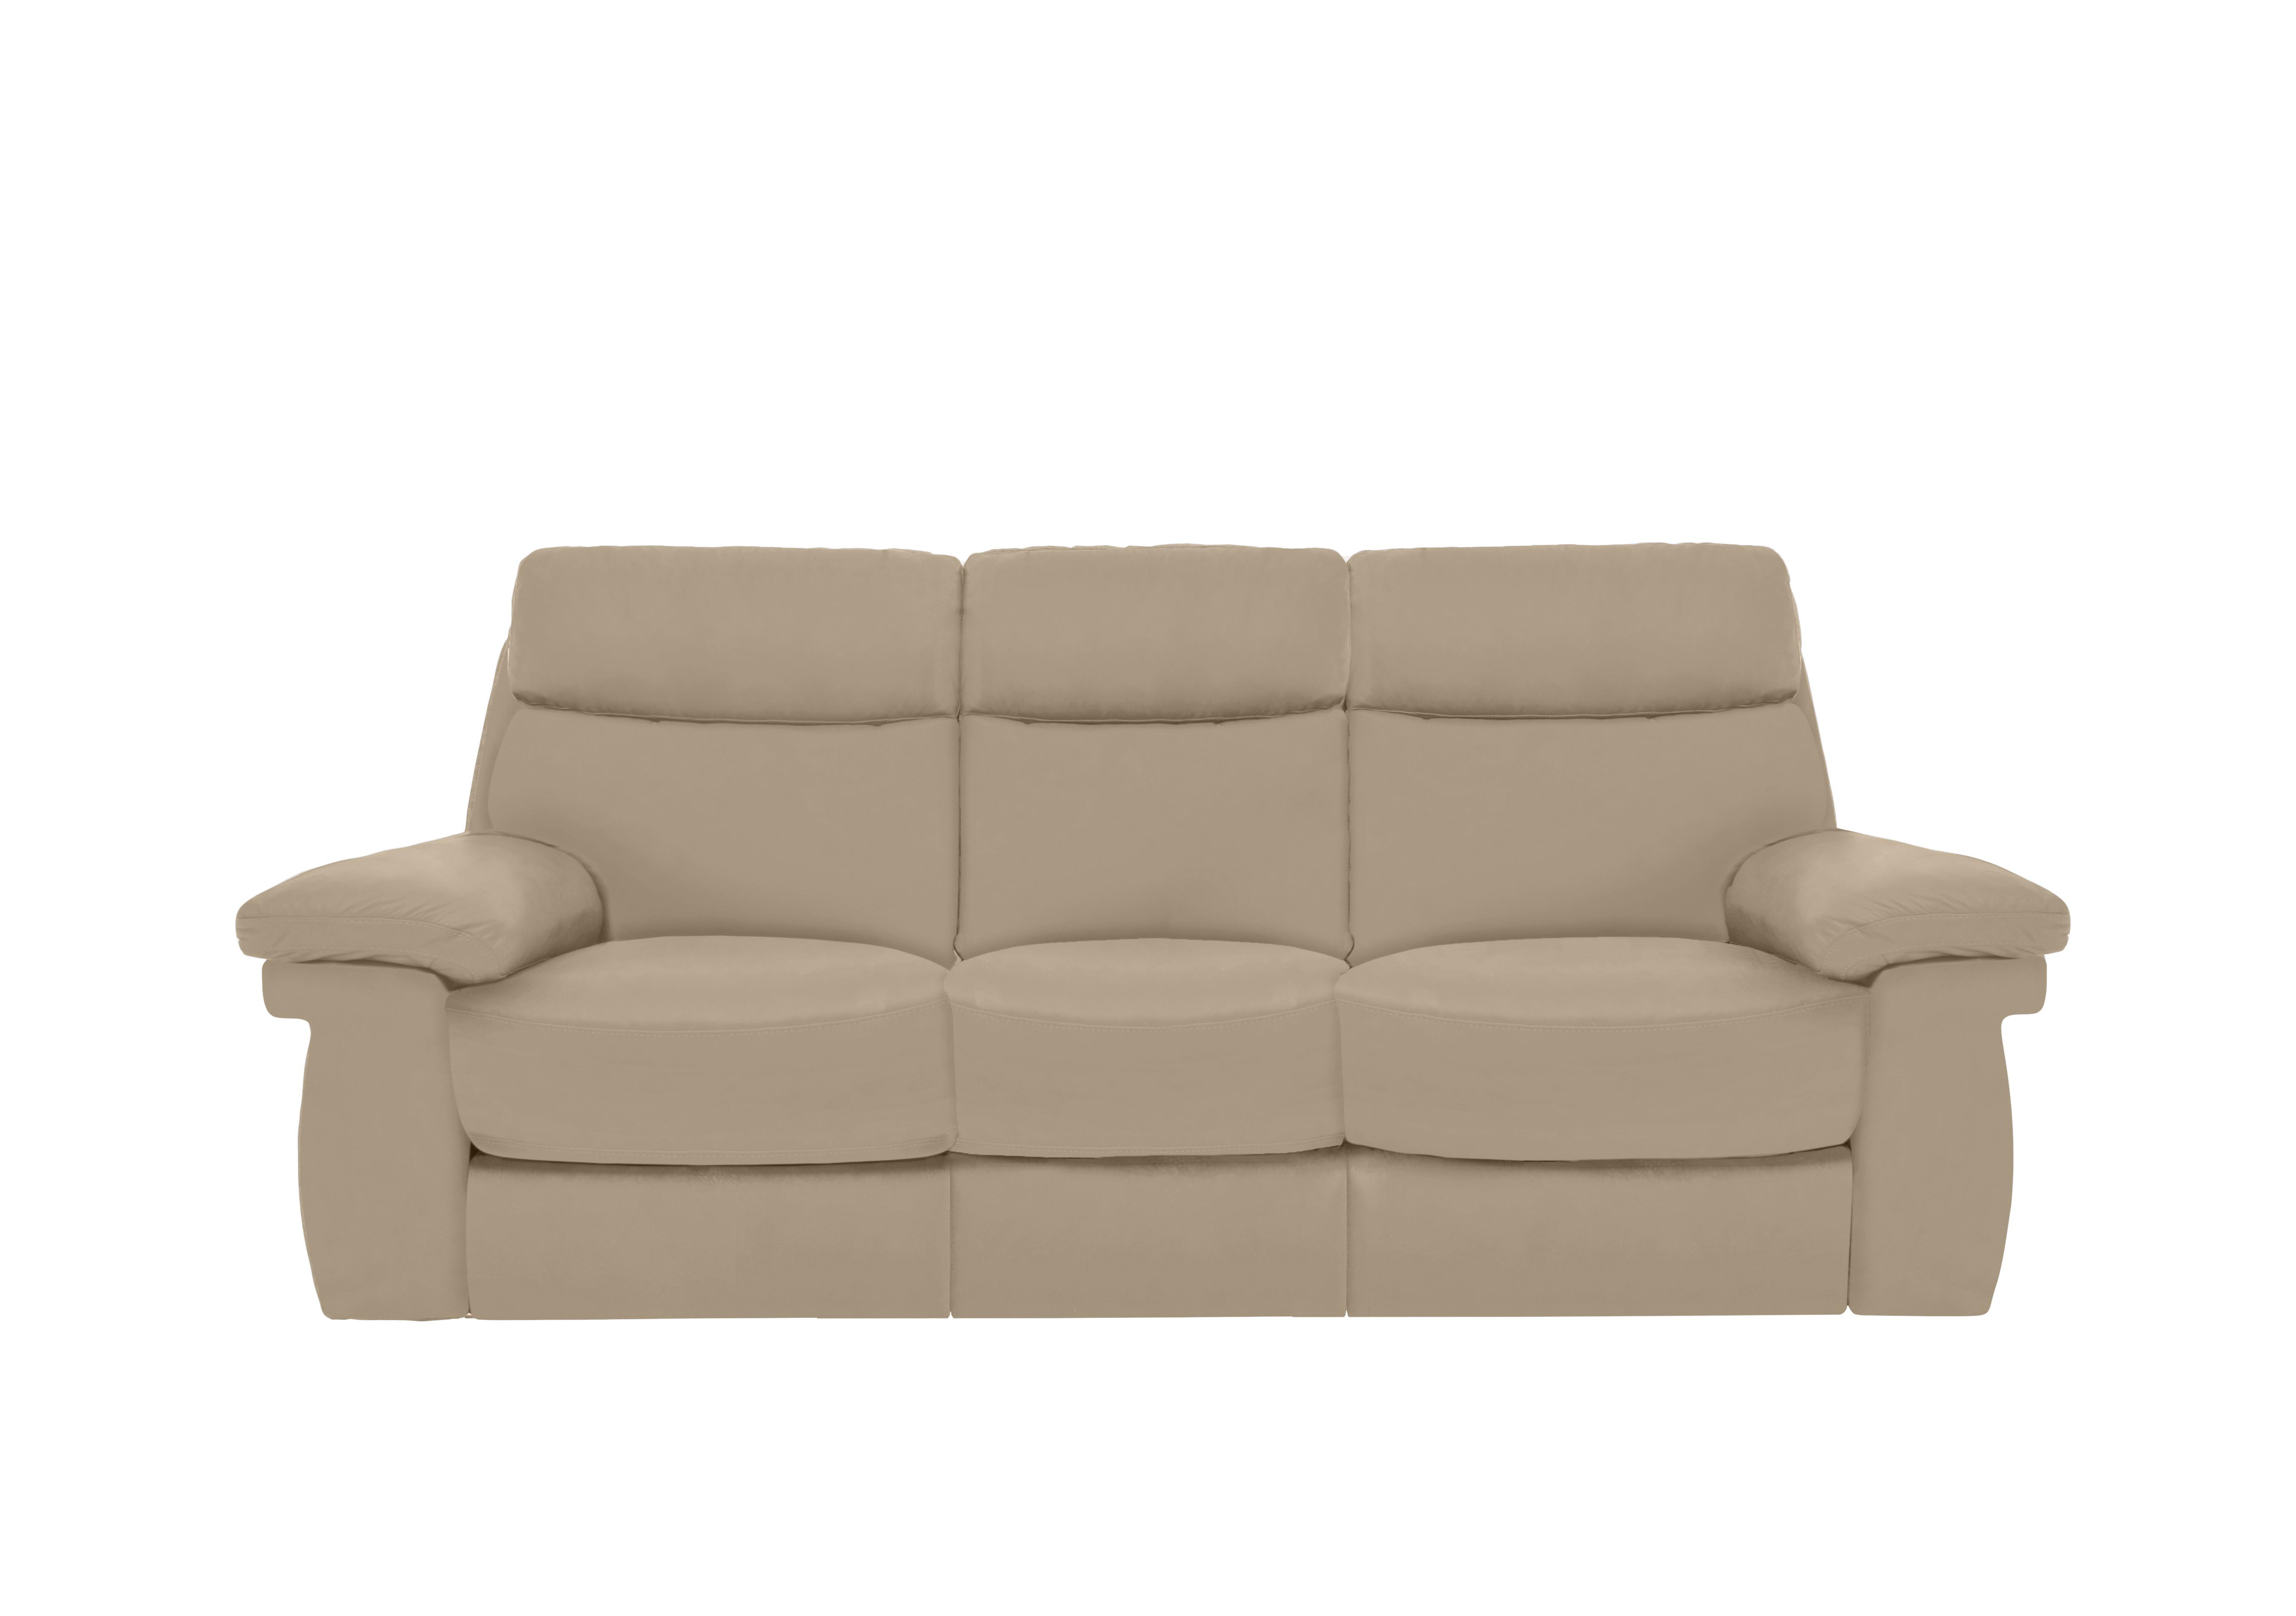 Serene 3 Seater Leather Sofa in Bx-039c Pebble on Furniture Village